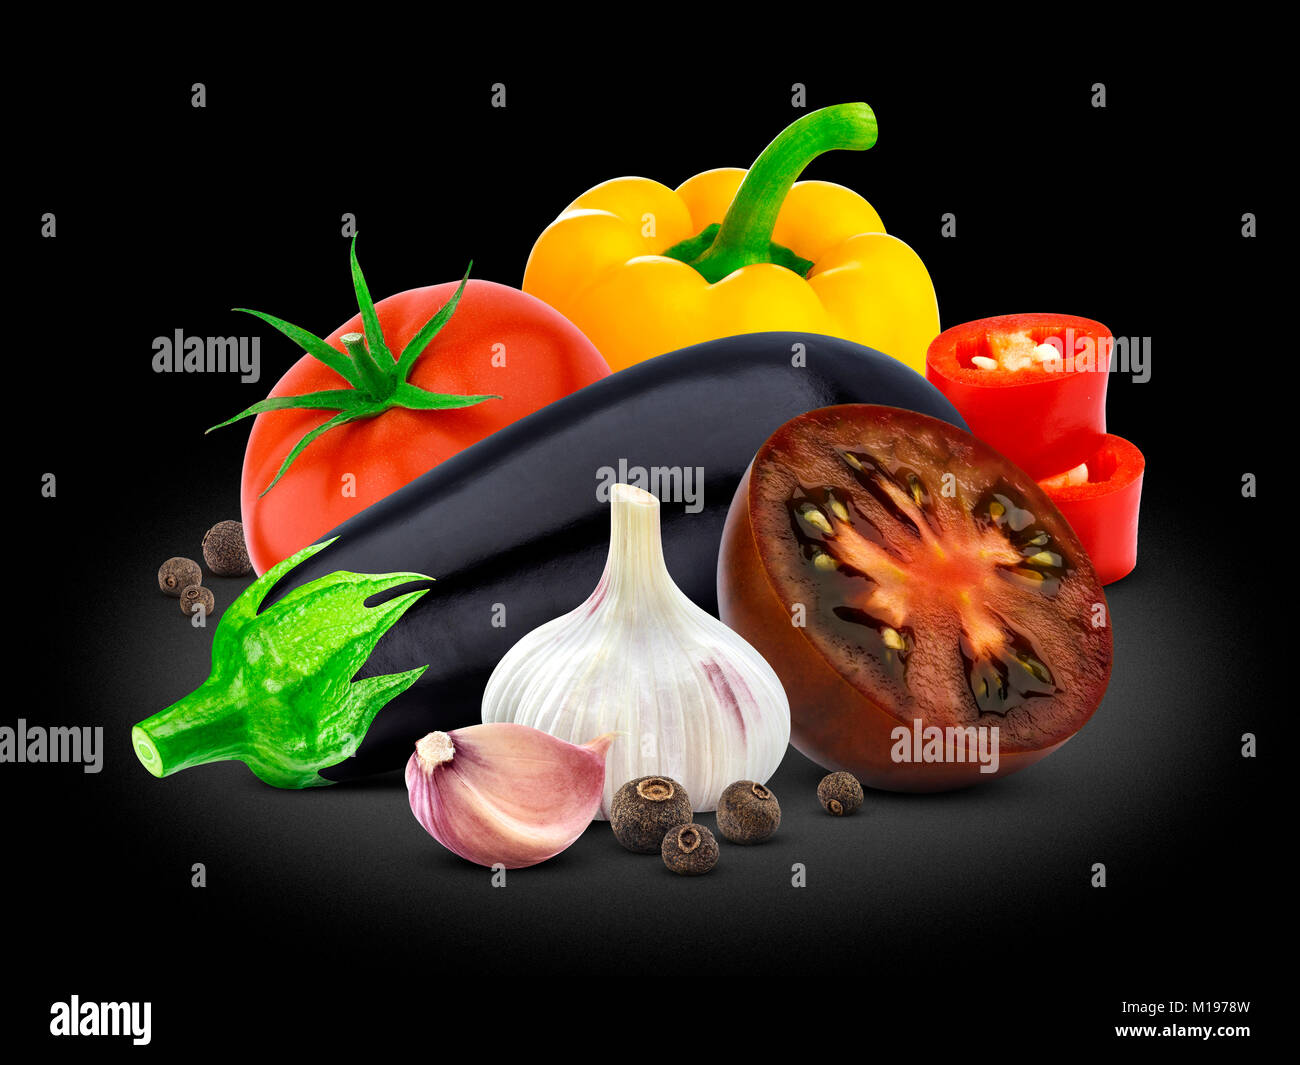 Group of vegetables. Eggplant, tomato, pepper and garlic on black background. Stock Photo